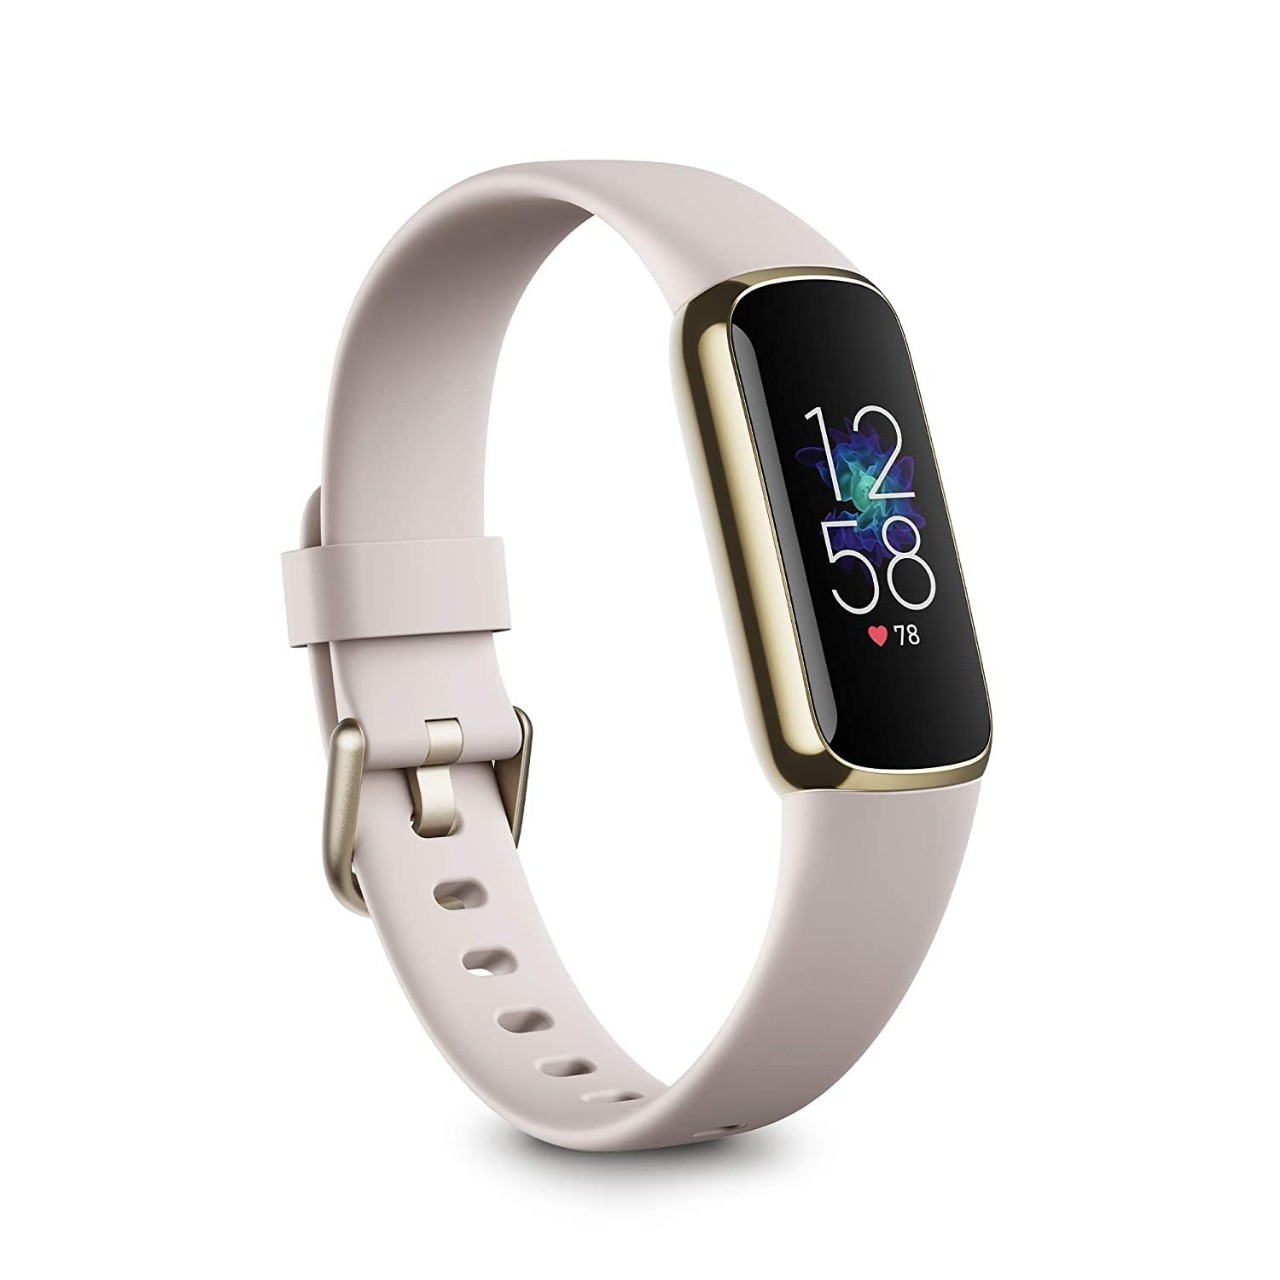 The Fitbit Luxe has a battery life